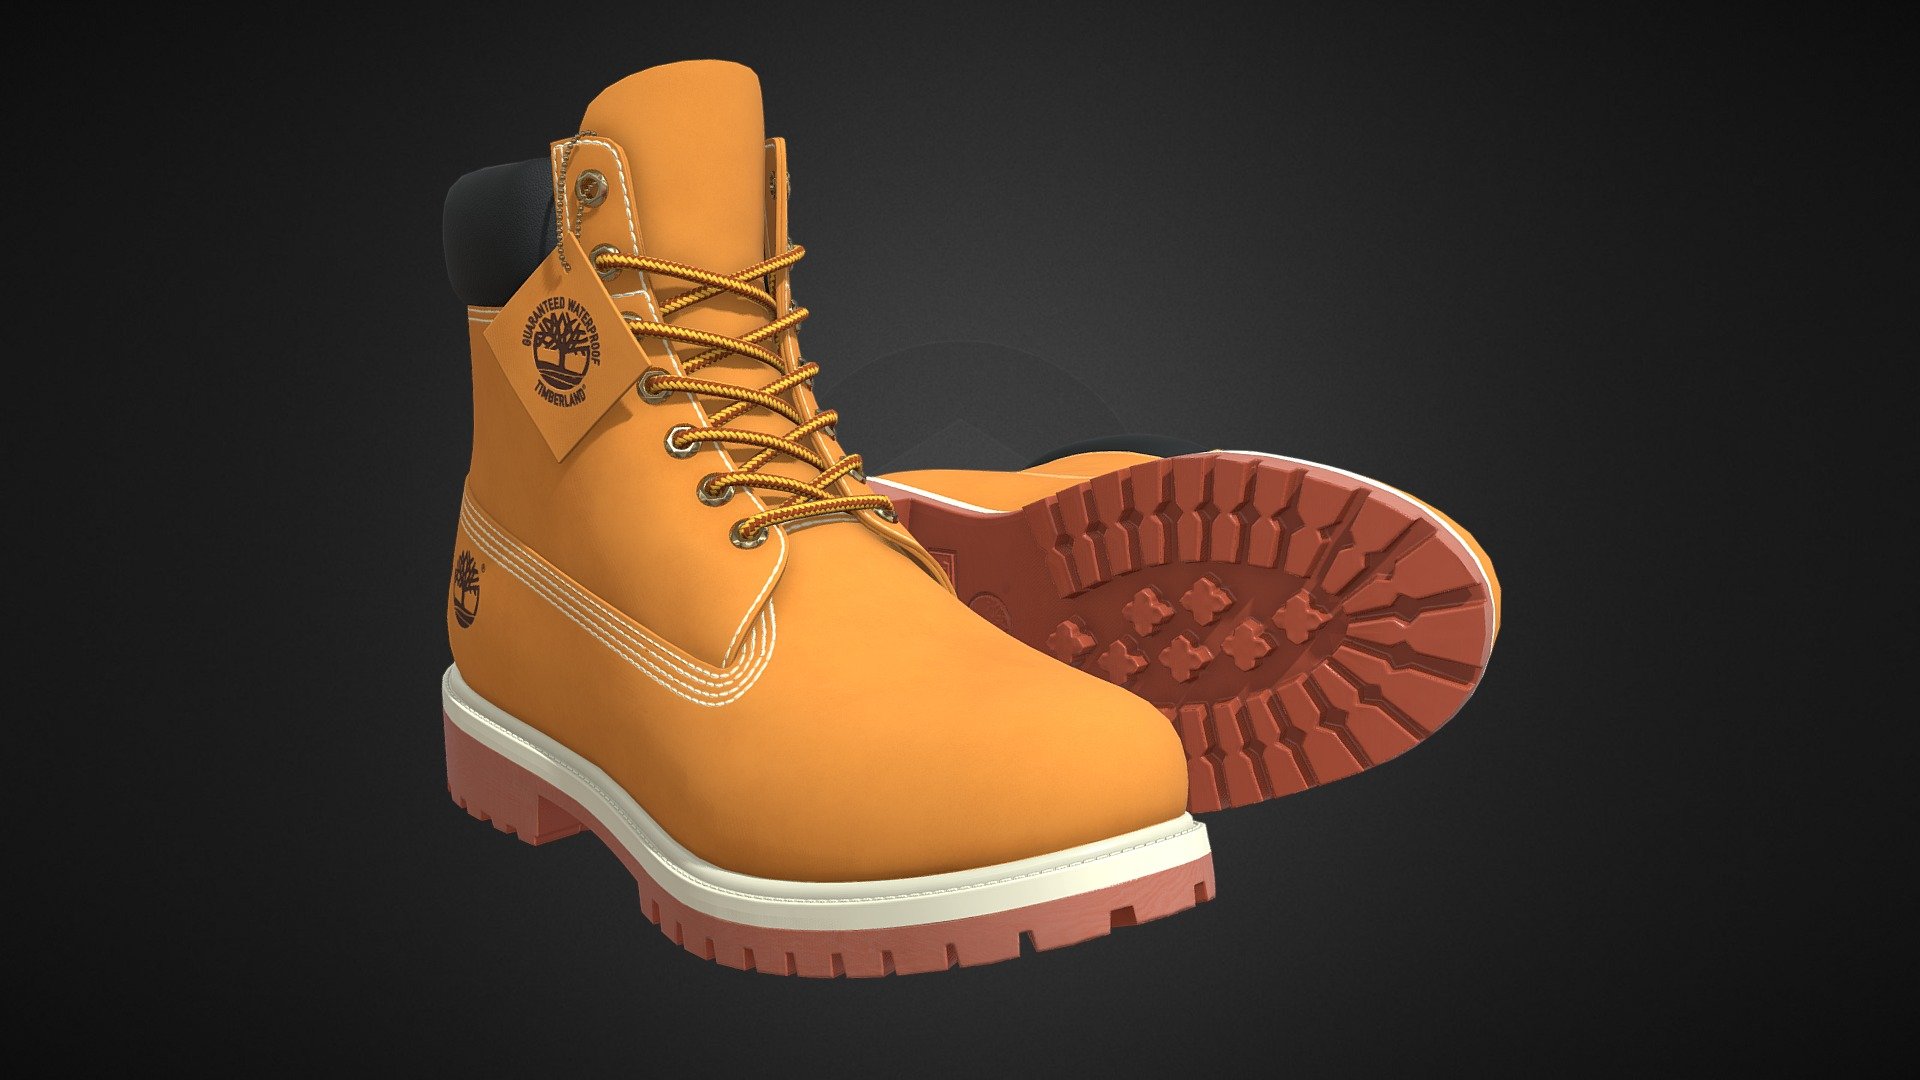 PBR midpoly model of Timberland premium 6-inches boots - Timberland Premium 6-inches waterproof boots - 3D model by maxwell (@manacards) 3d model